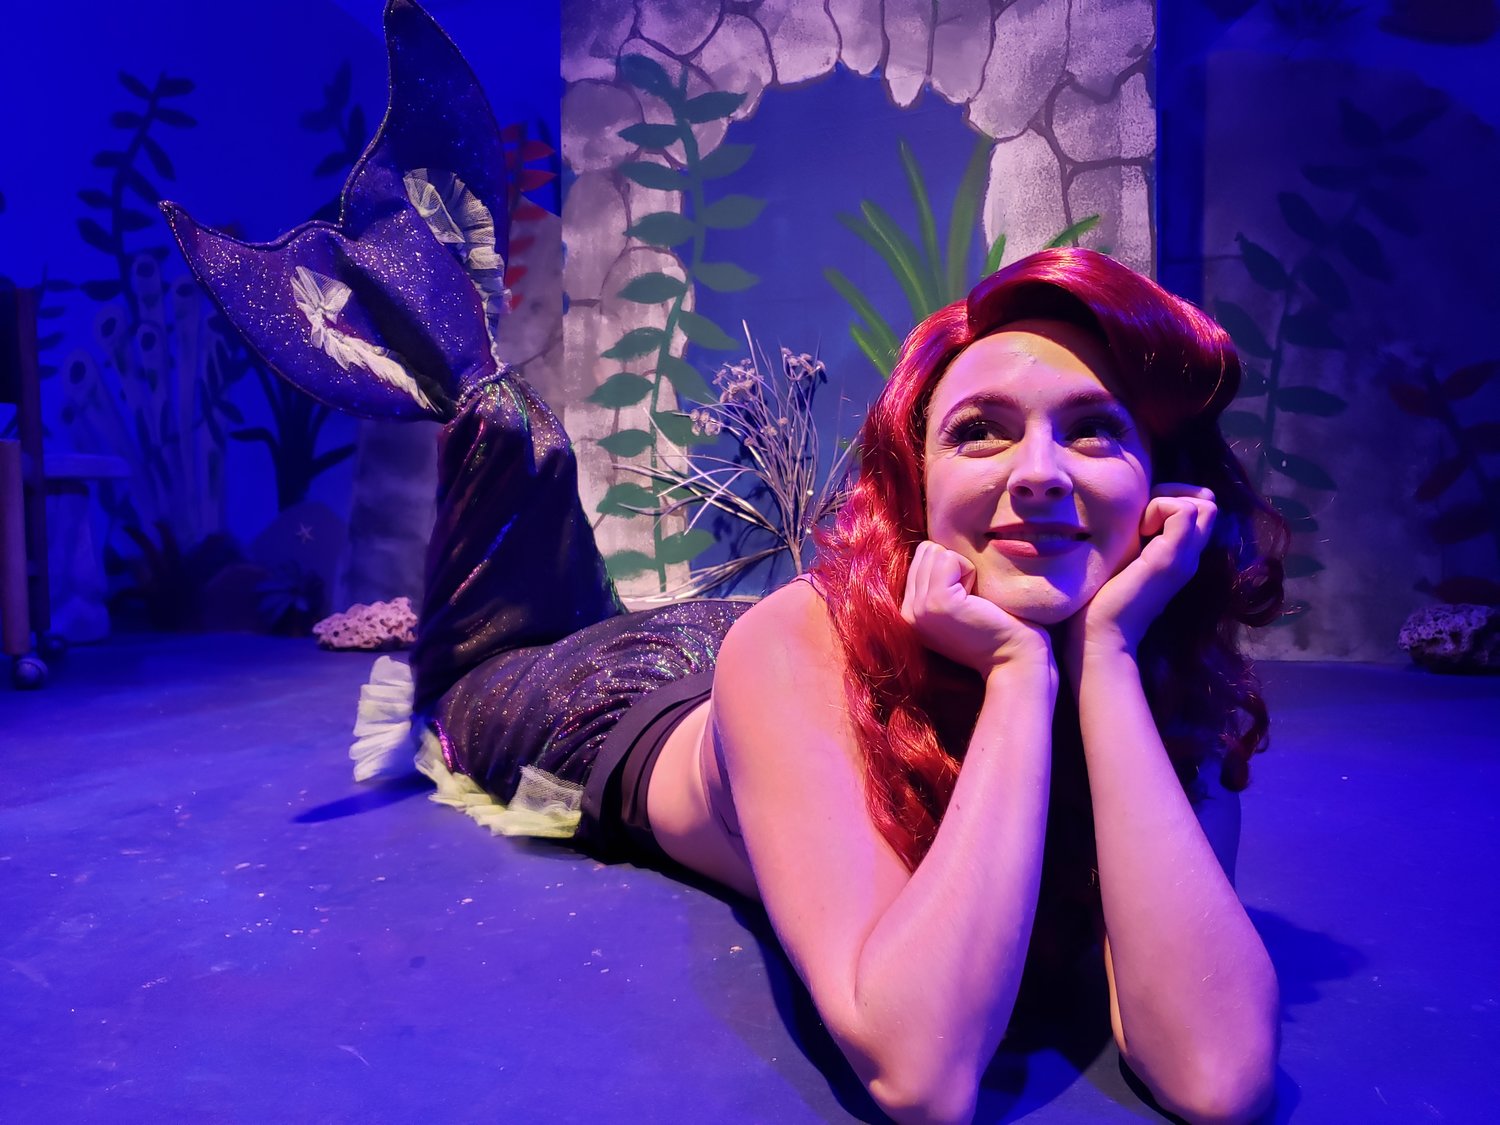 Myers Dinner Theatre in Hillsboro reopens Saturday with Disney's The Little Mermaid.